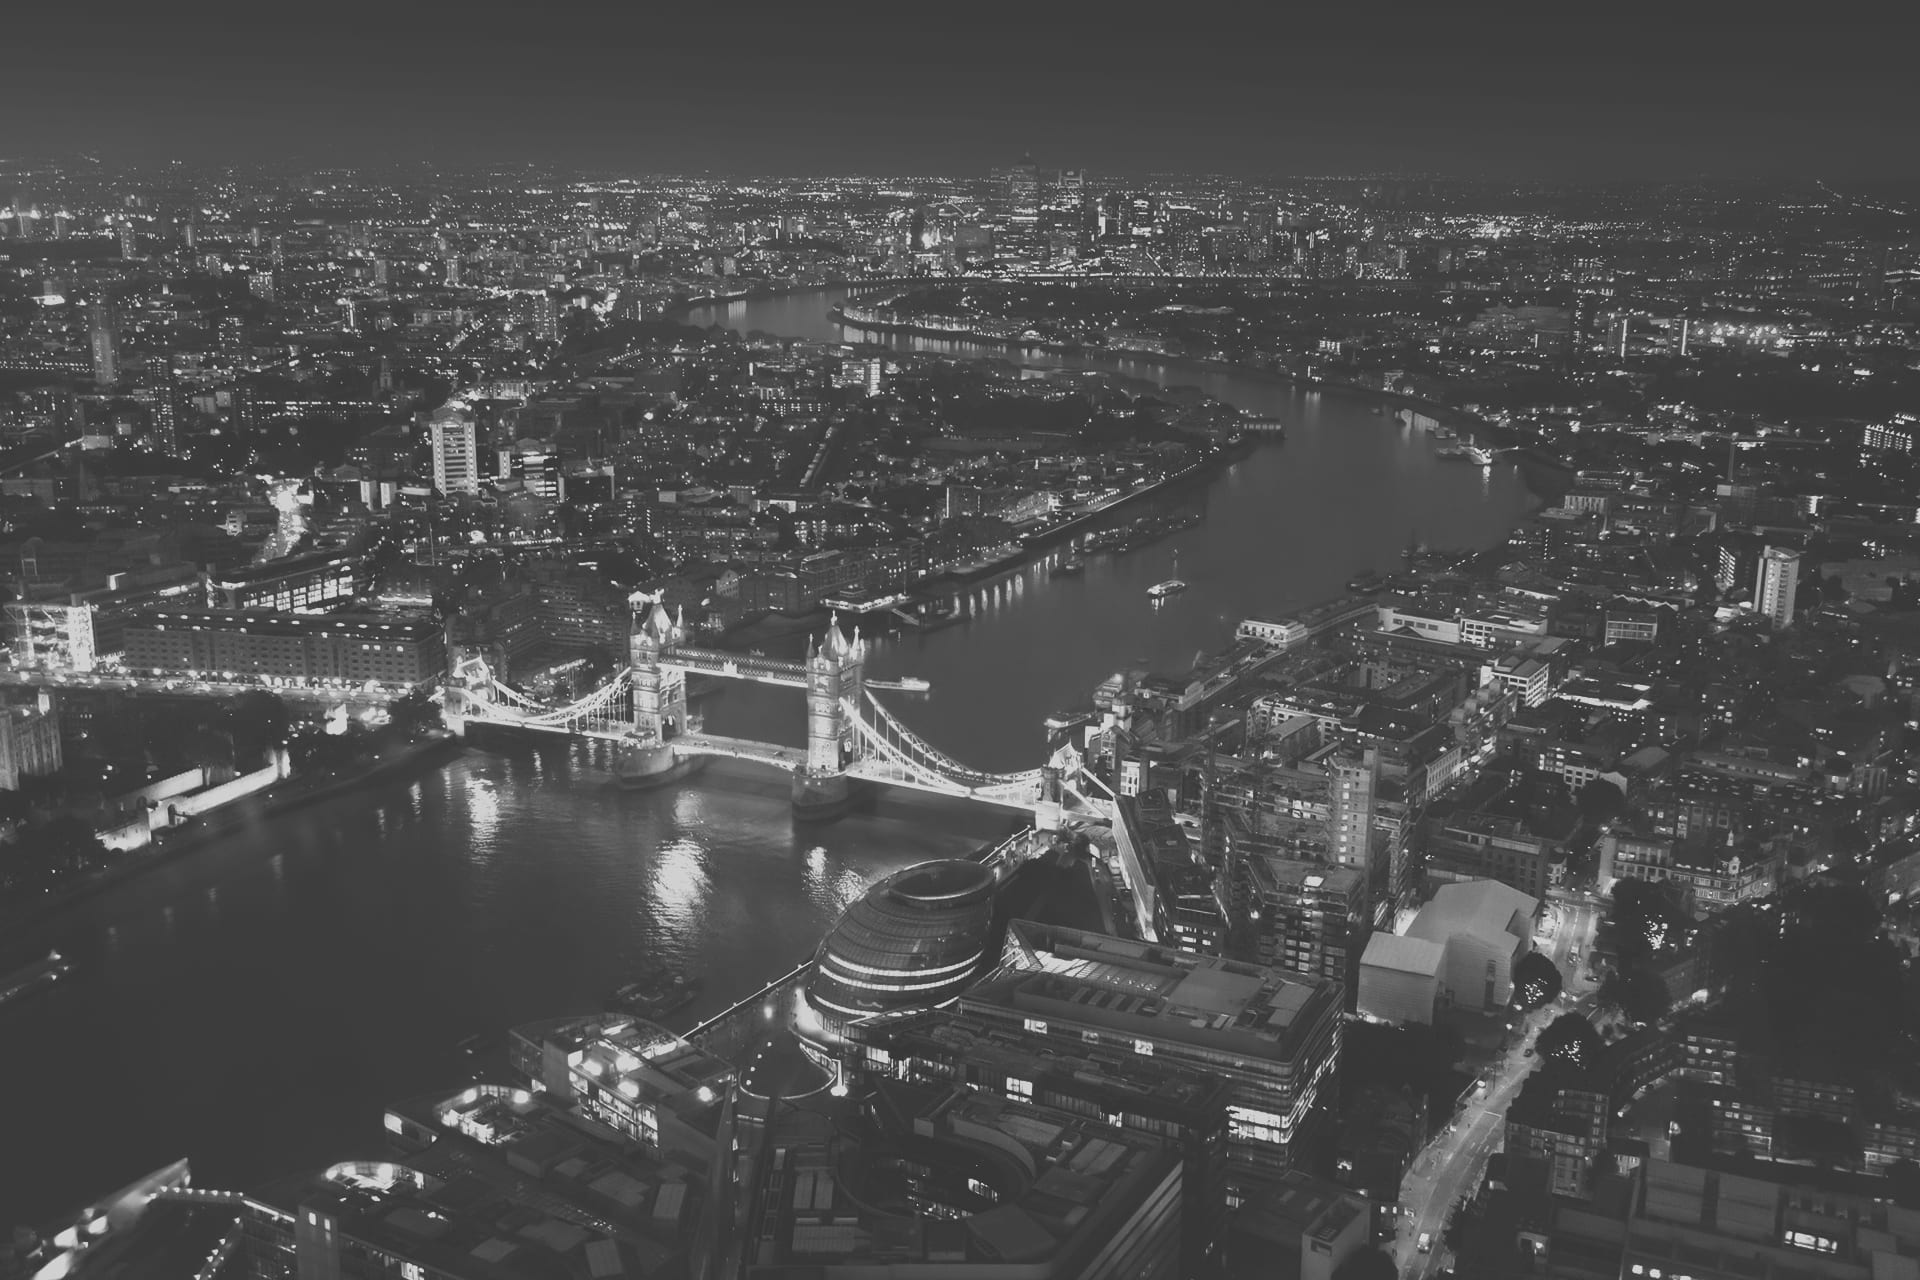 City of London from above at night